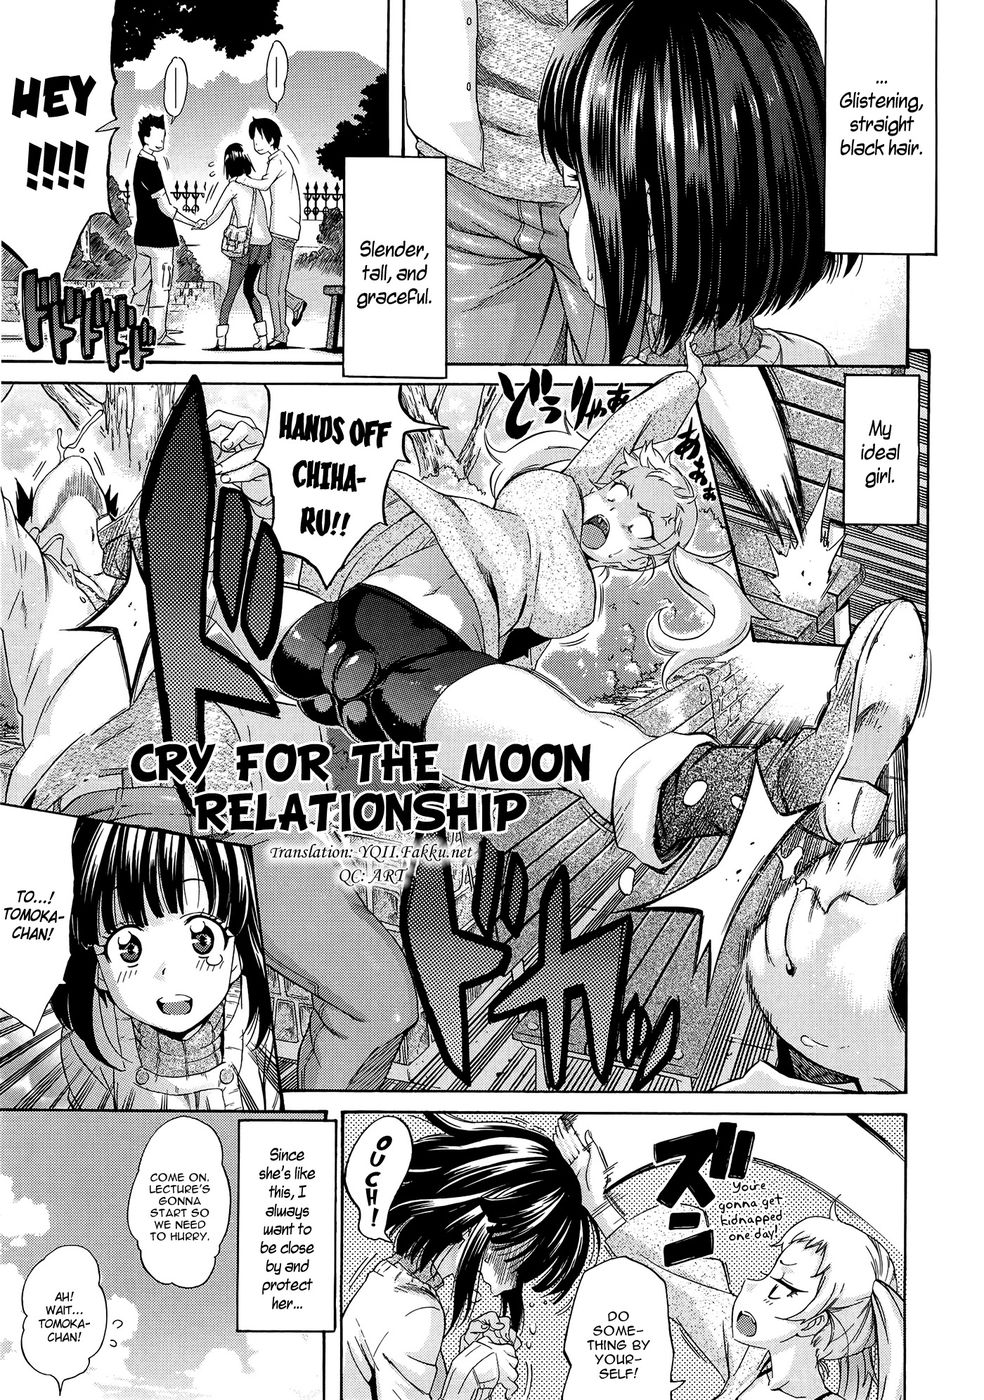 Hentai Manga Comic-Melody-Chapter 2-Cry For The Moon Relationship-1